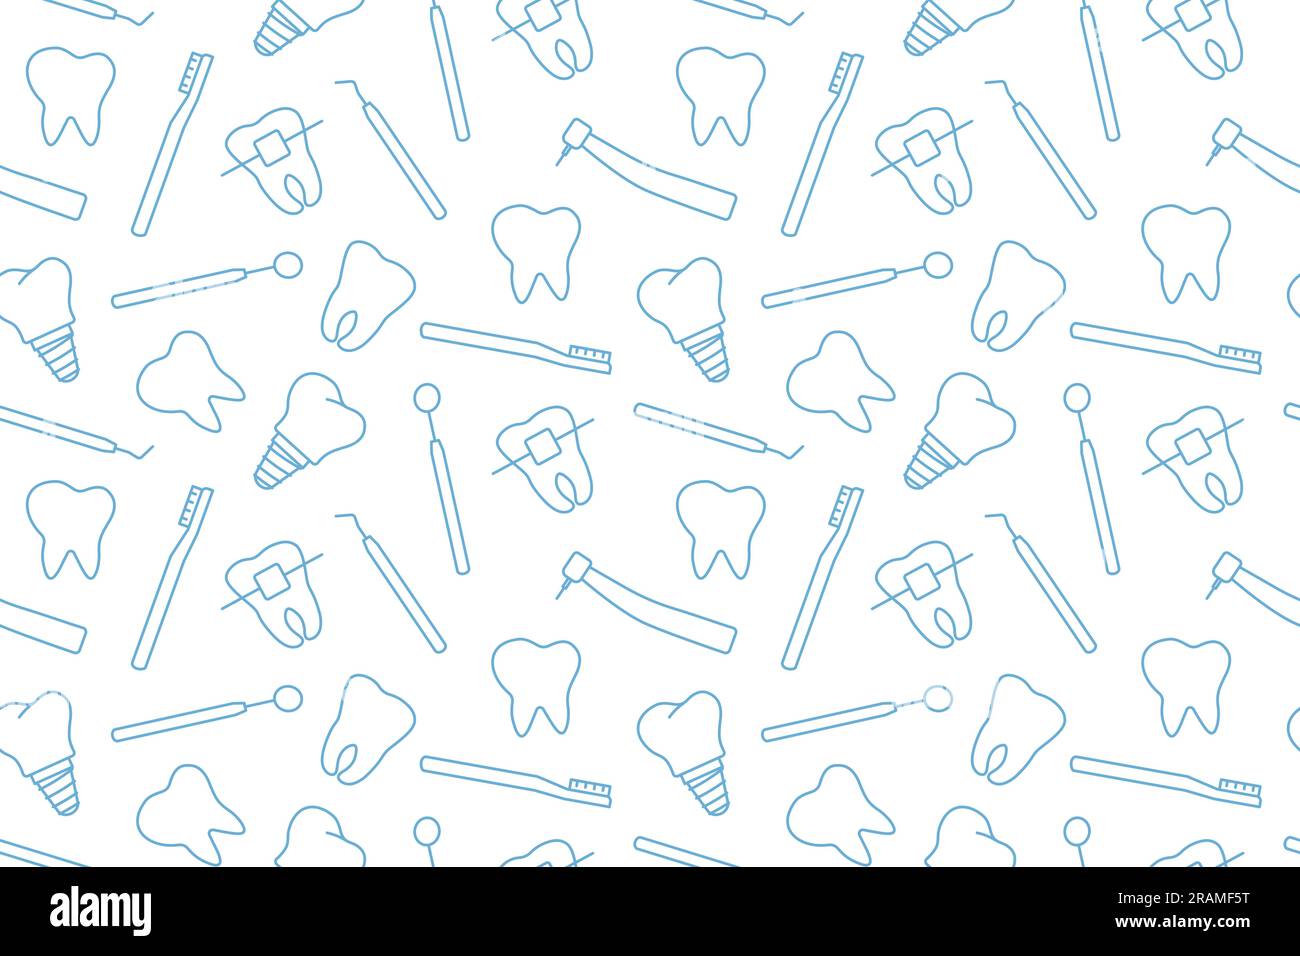 dental pattern, toothbrush, implant, tooth, bracket, dentist tools outline icons- vector illustration Stock Vector